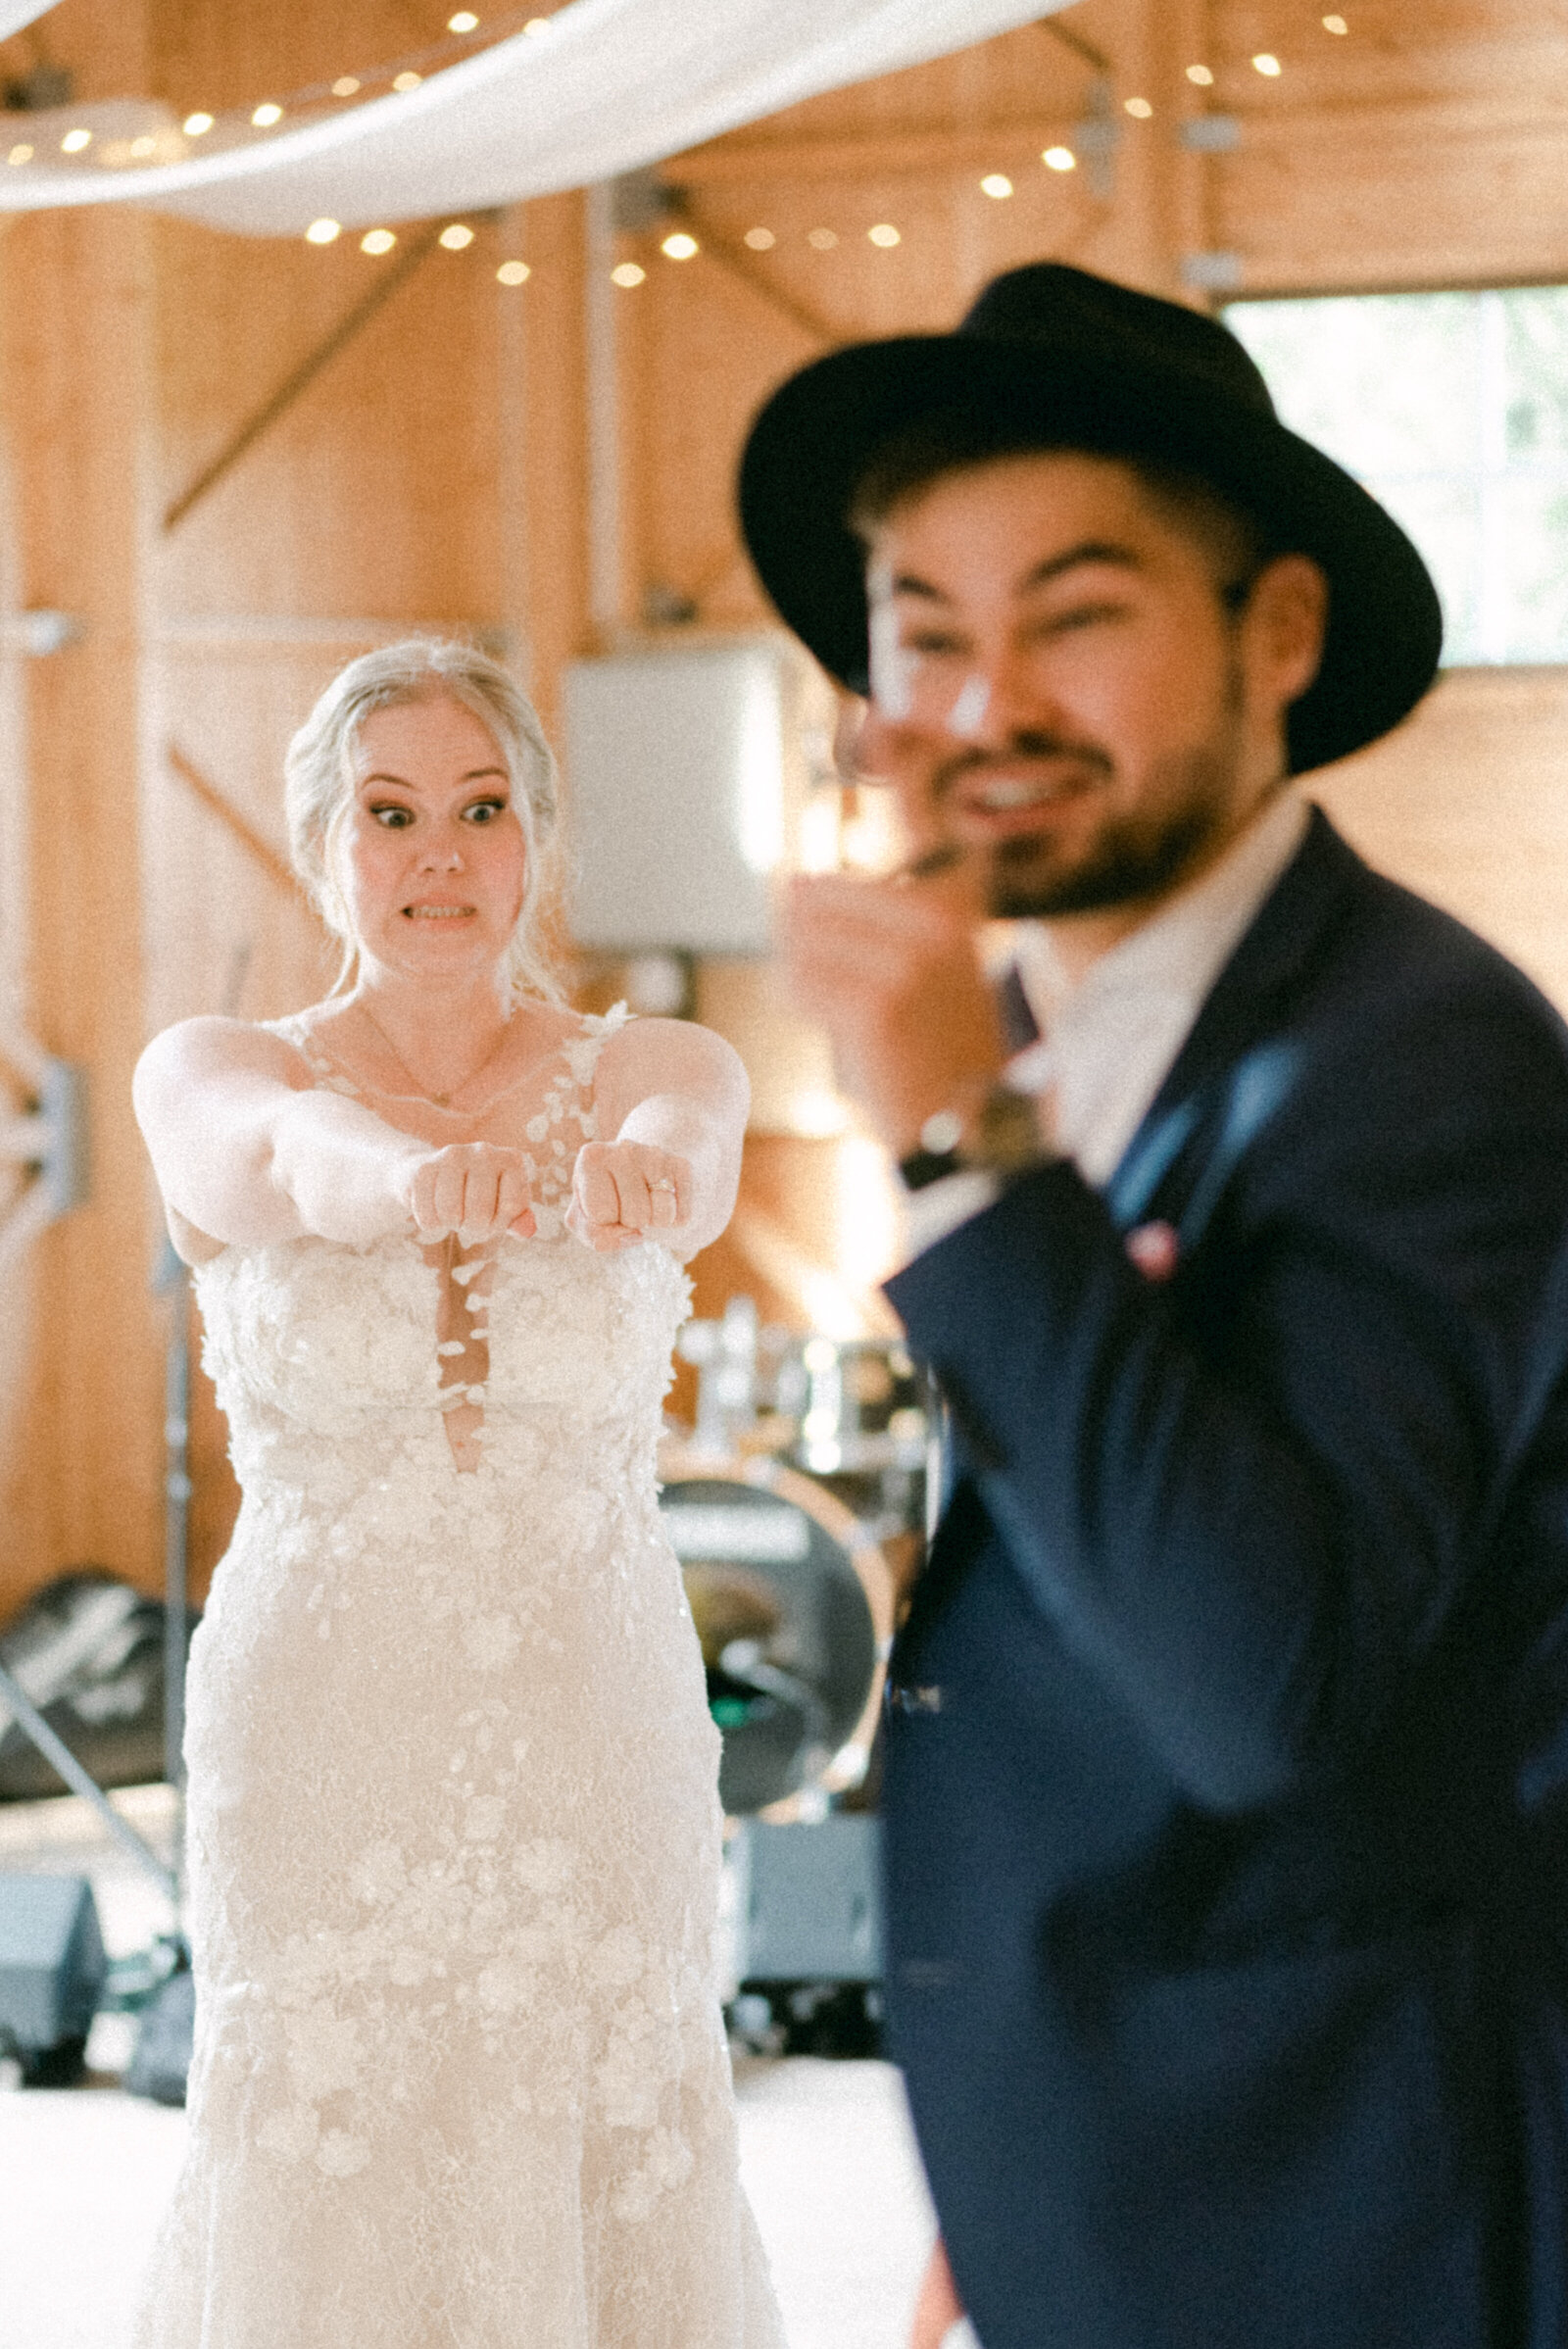 A magician doing a magic trick with the bride at the wedding in an image photographed by wedding photographer Hannika Gabrielsson.